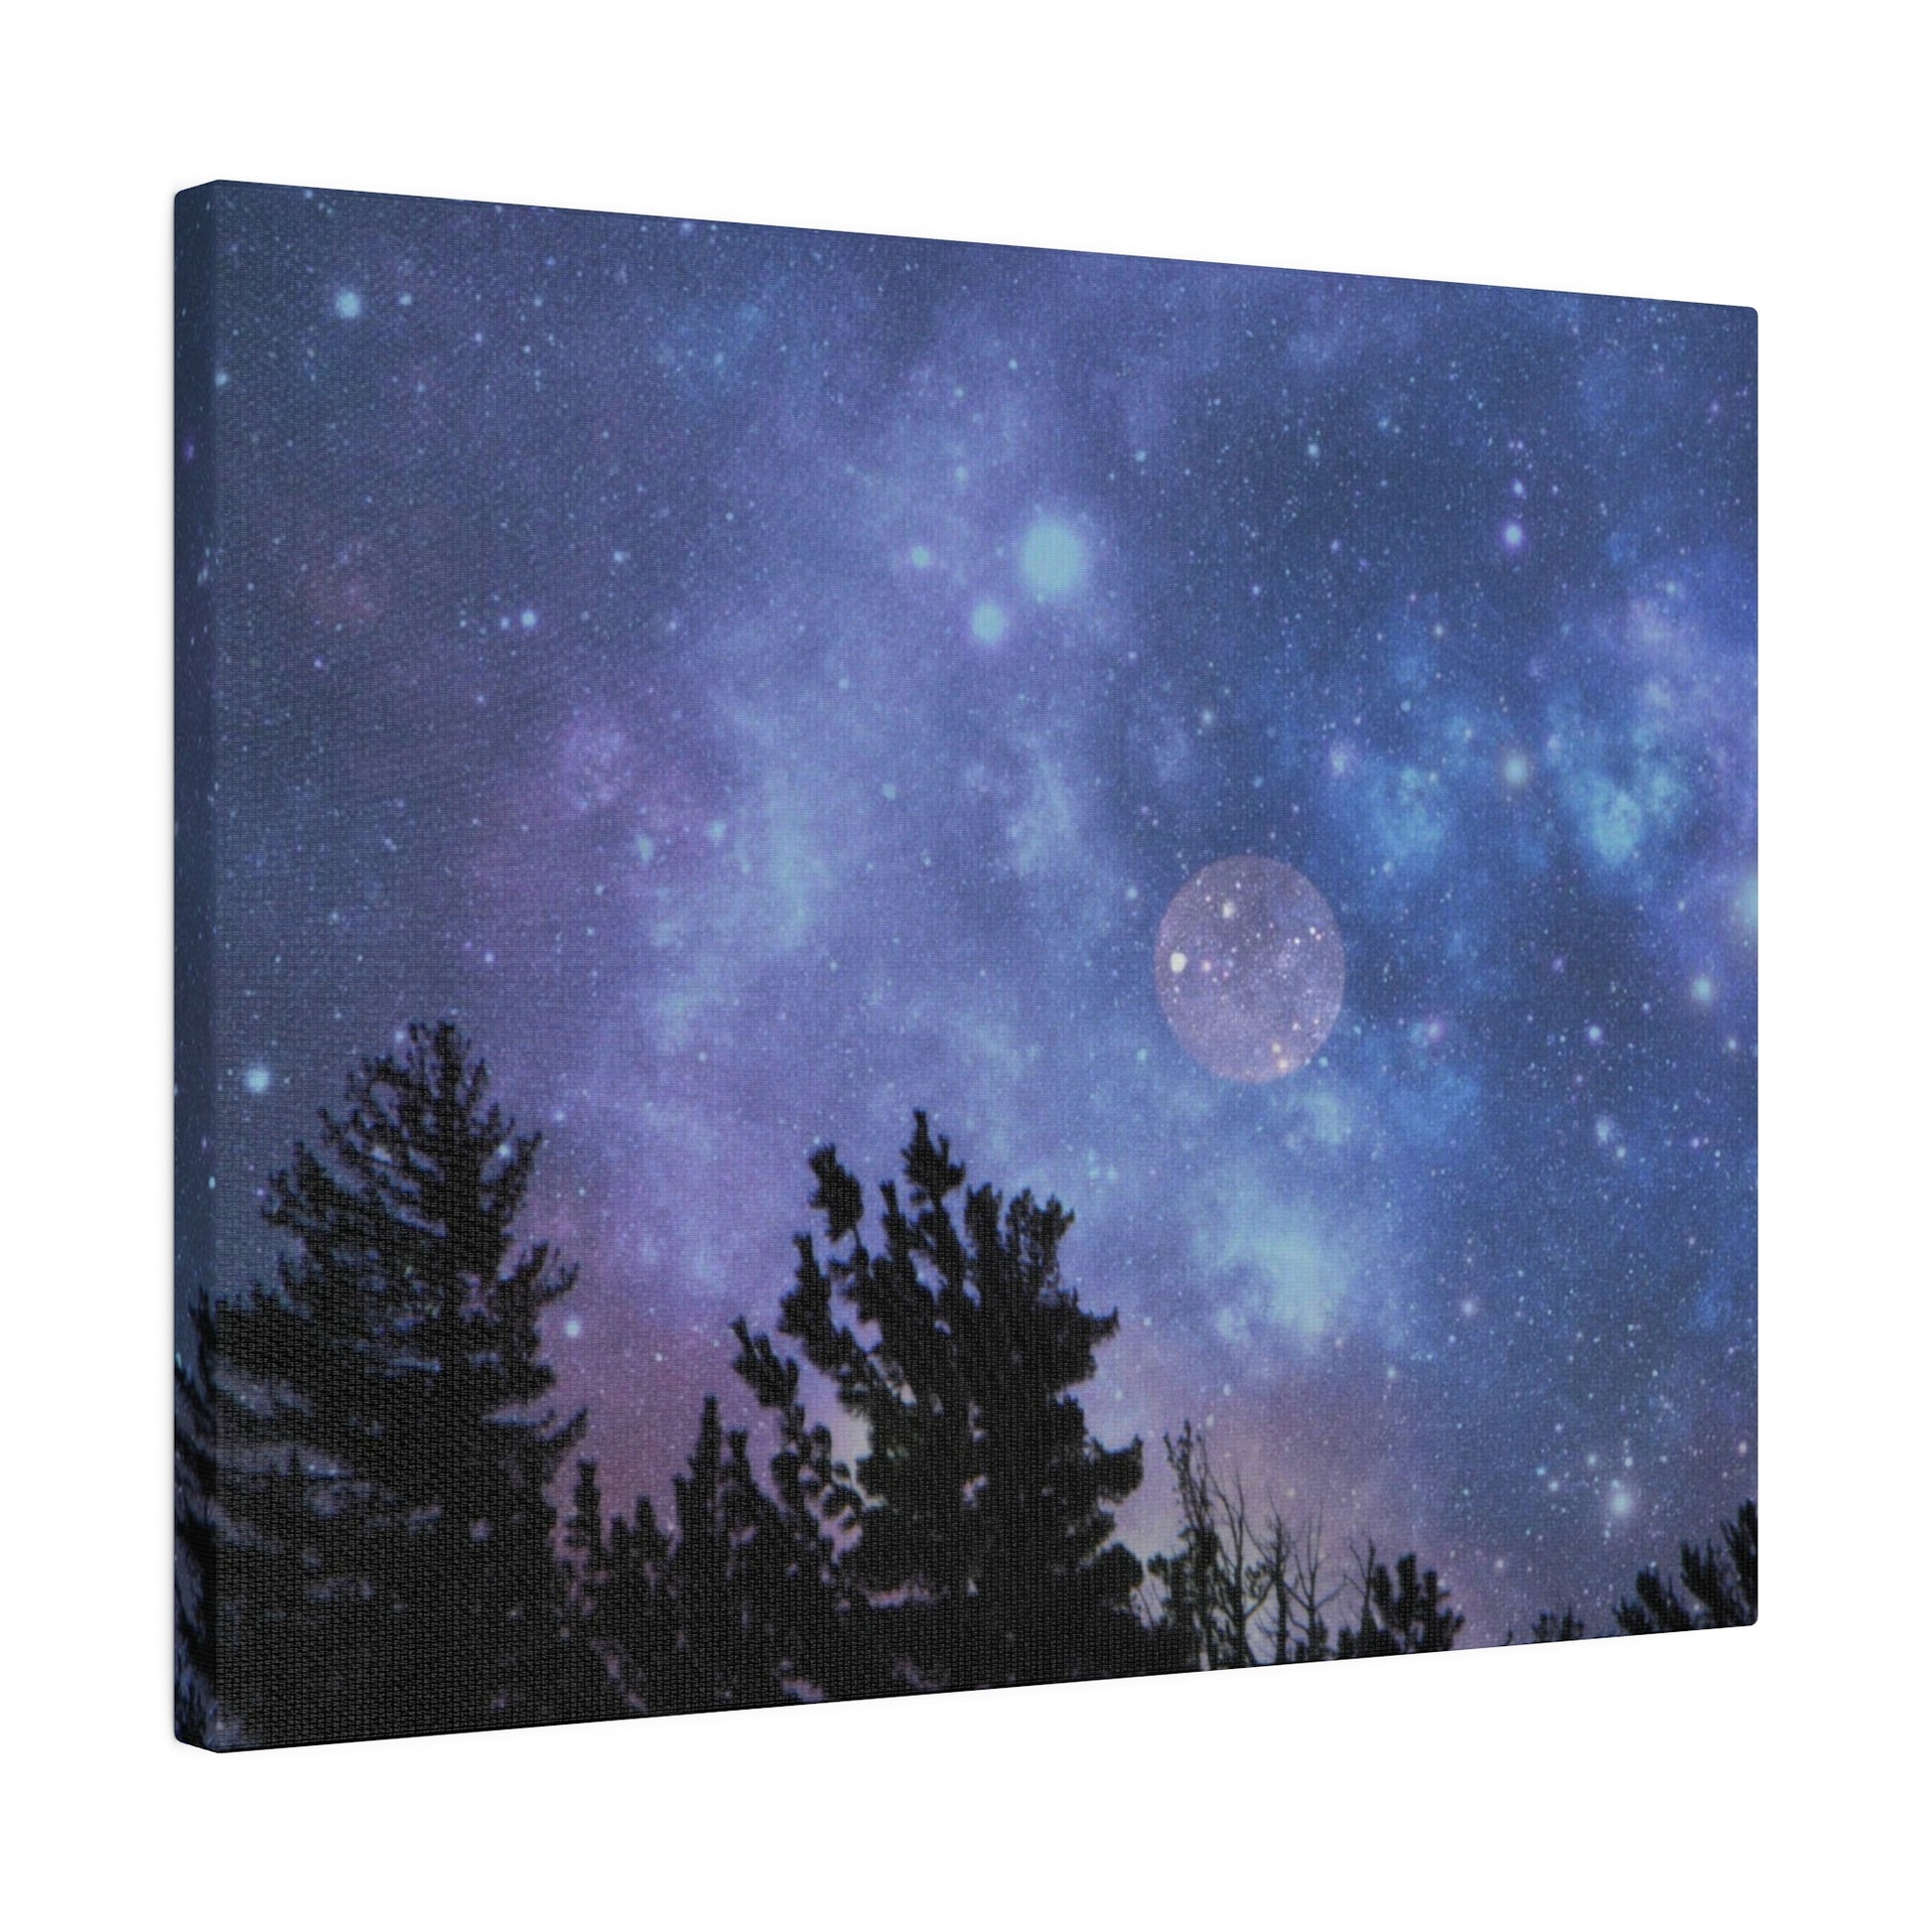 Sentence with replaced product:
Canvas print of a night sky with stars and a full Blue-Moon Matte Canvas above silhouetted pine trees from Printify.